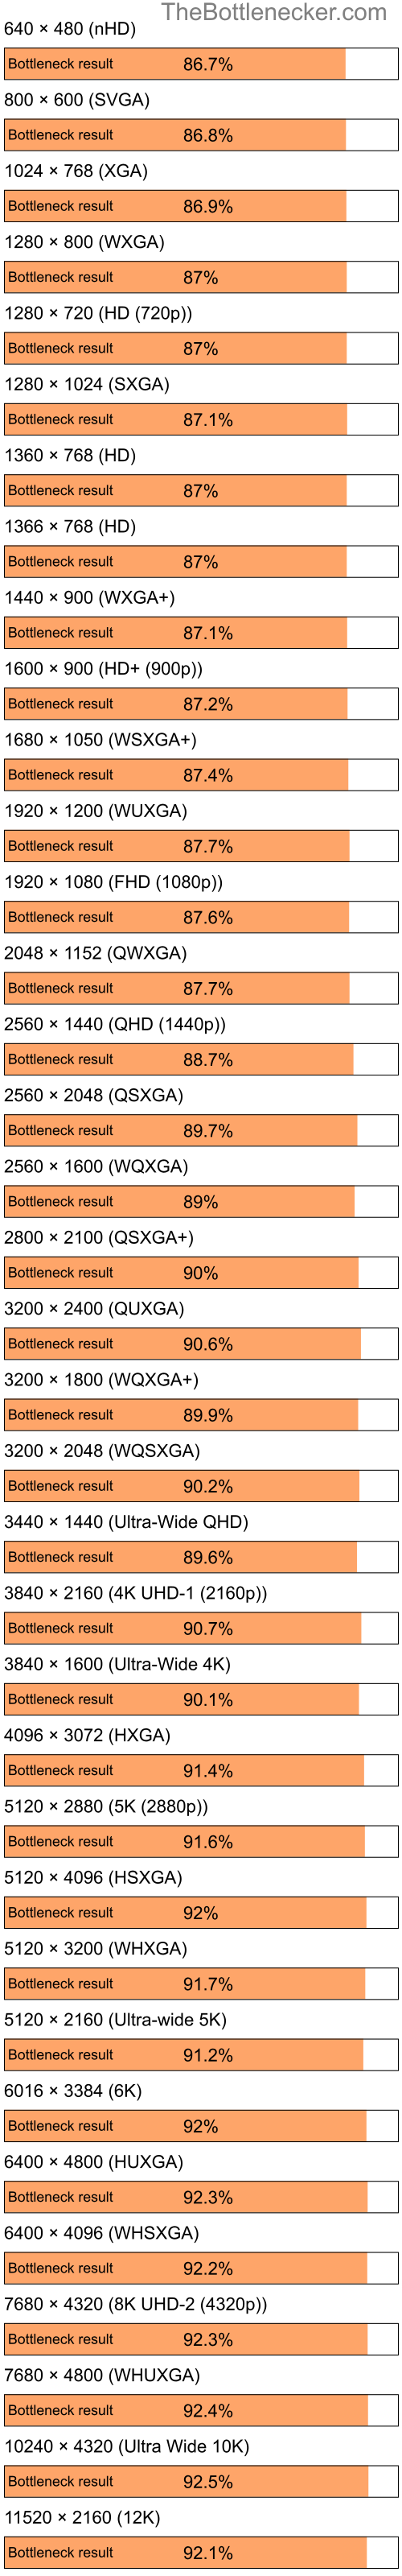 Bottleneck results by resolution for Intel Pentium 4 and NVIDIA GeForce FX 5600XT in General Tasks